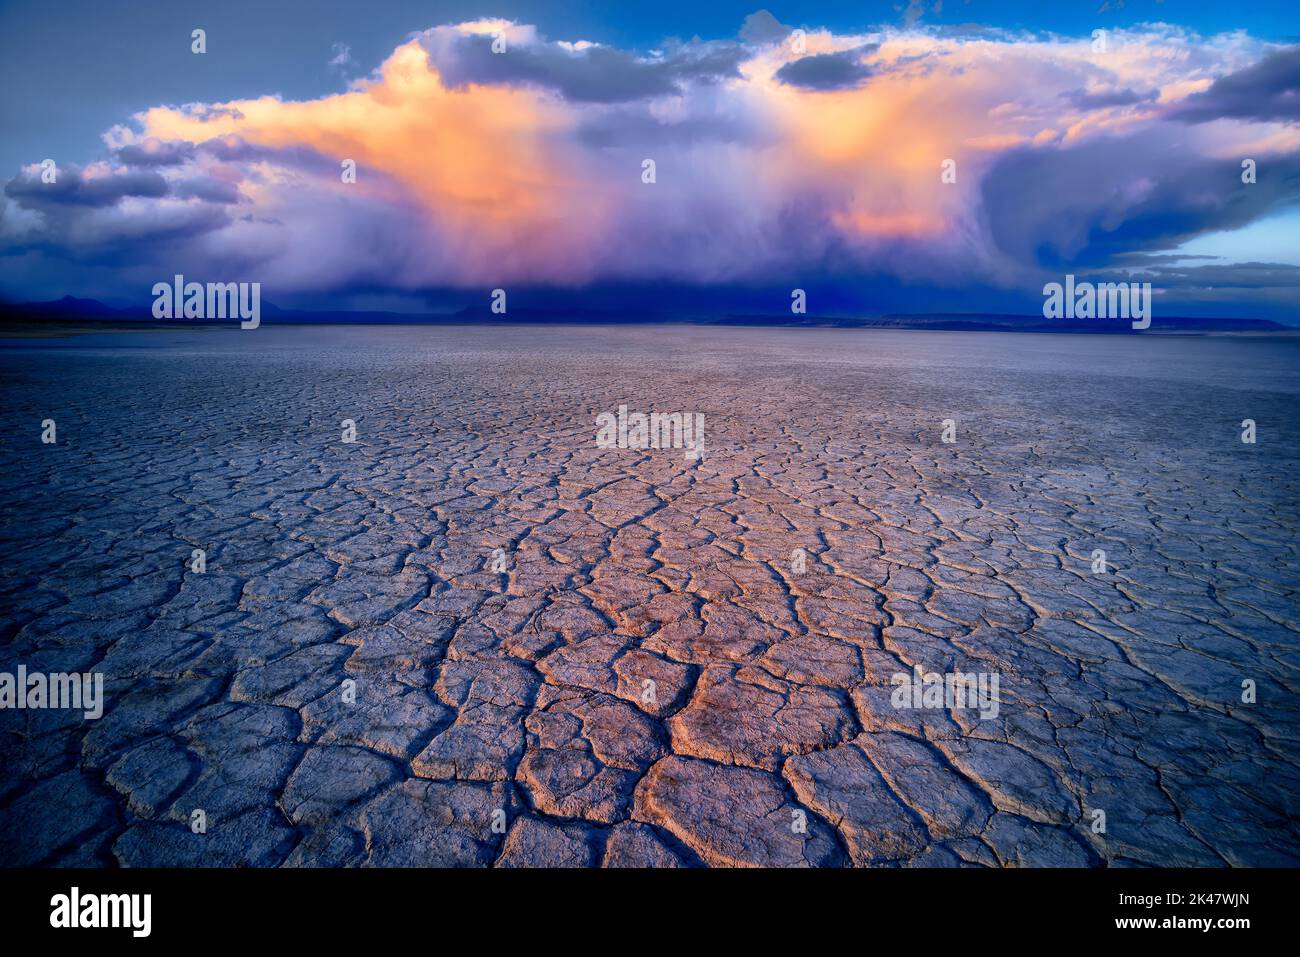 Alvord Desert and clouds Harney County, Oregon. Stock Photo